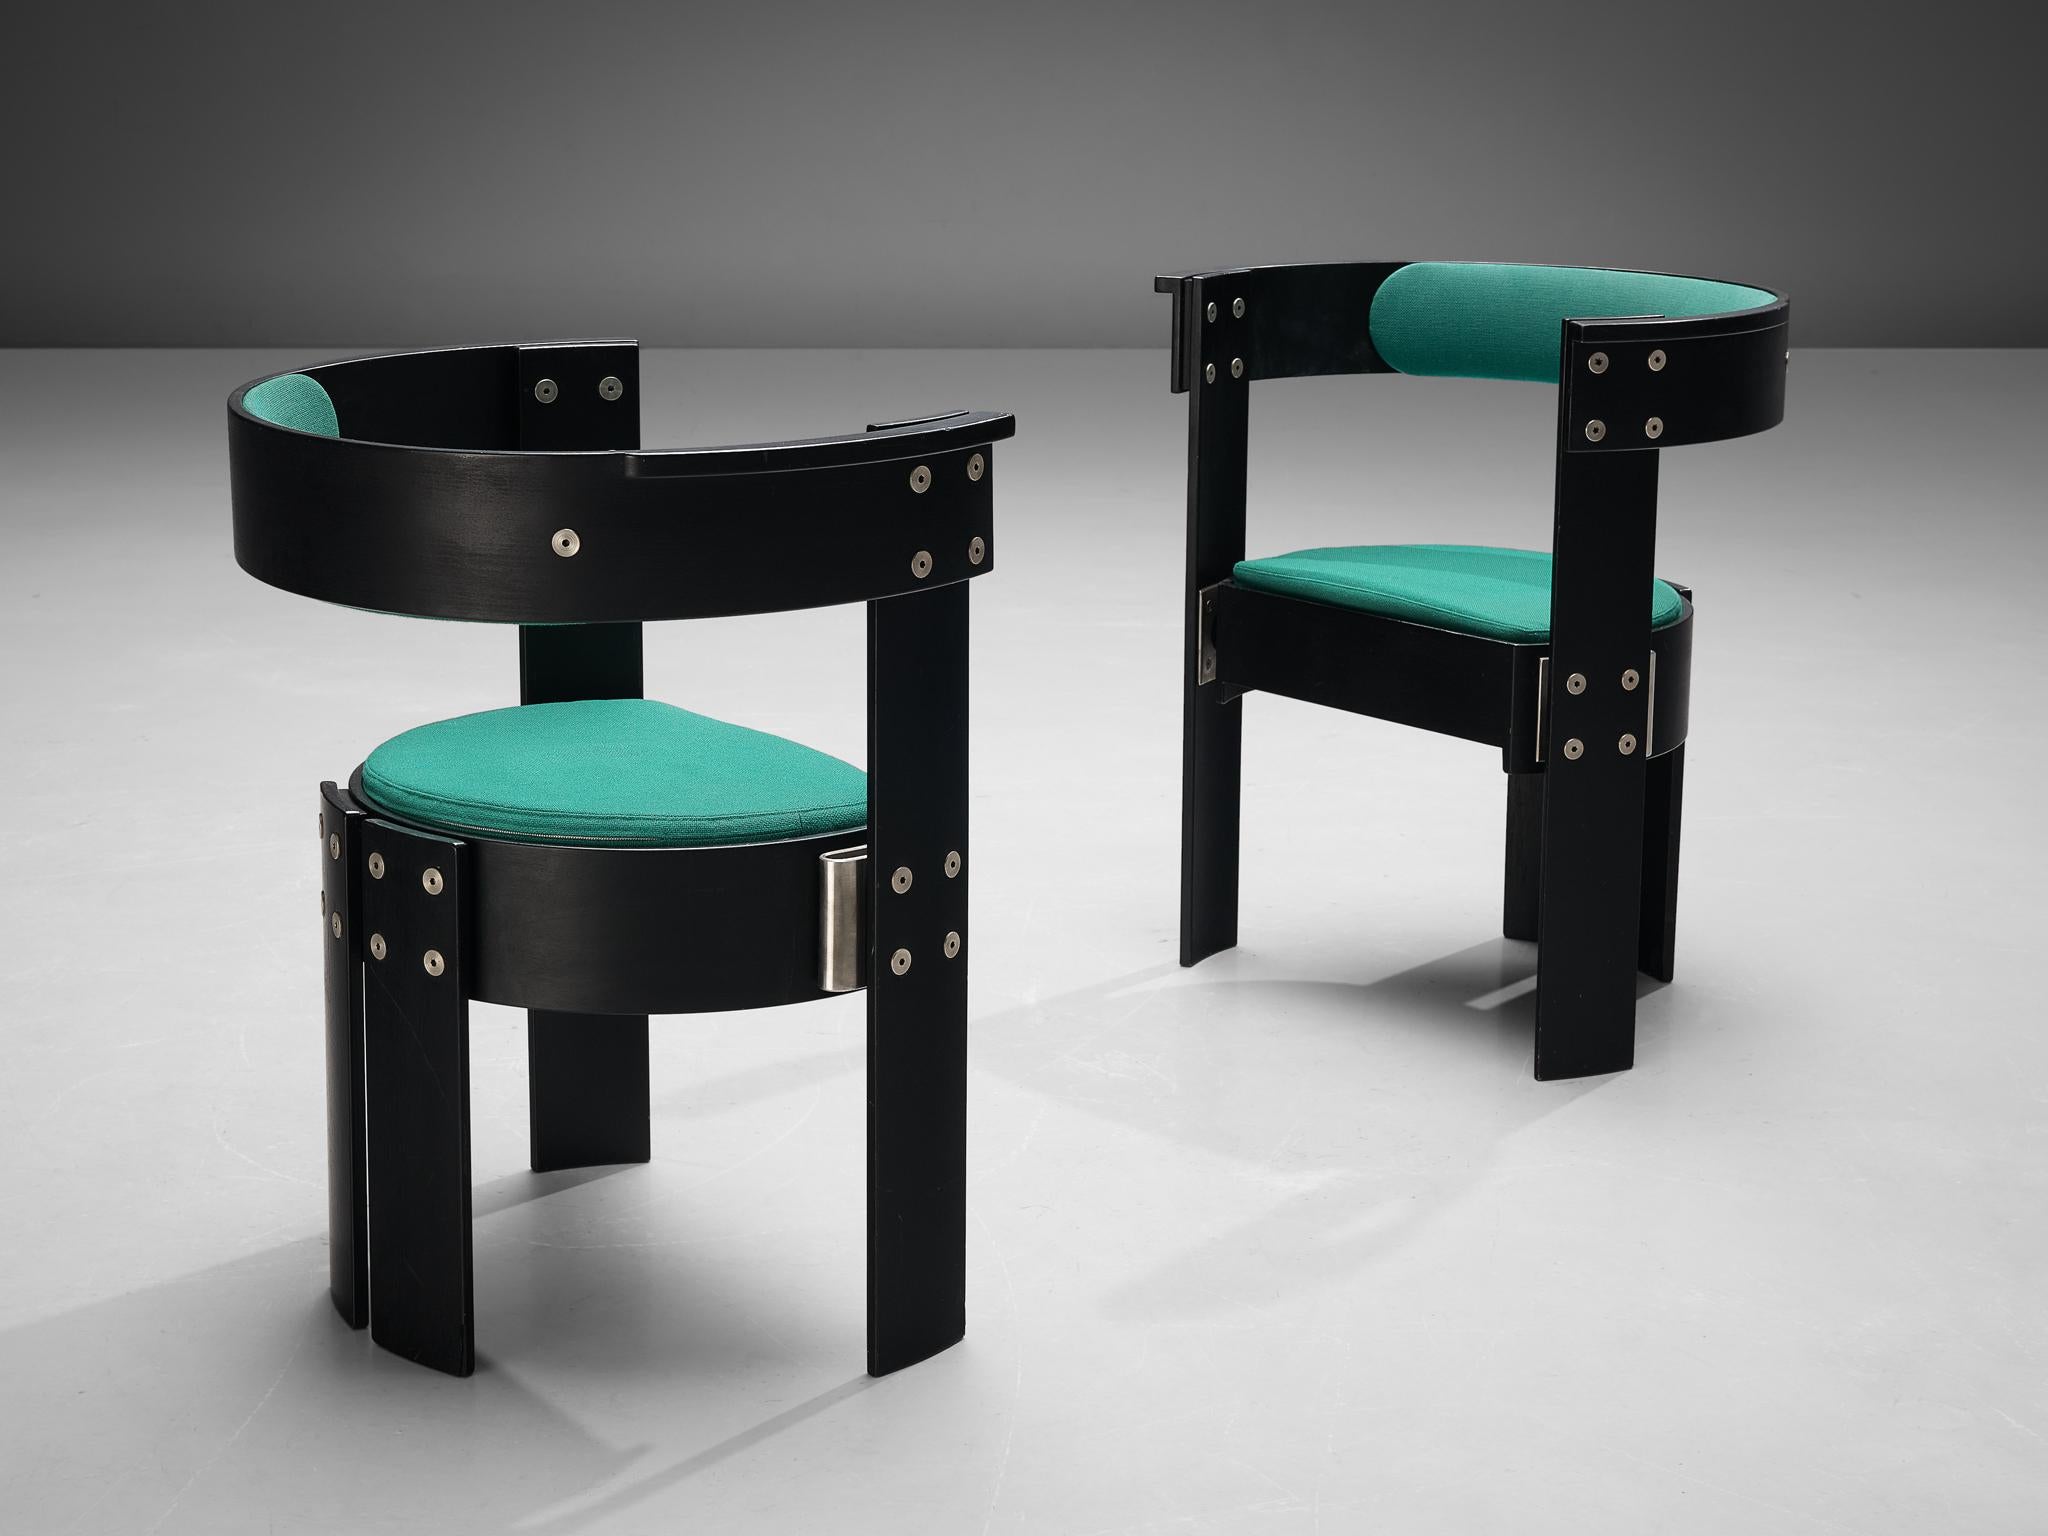 Tarquini Mårtensson, Michael Tarp Jensen, pair of armchairs, black lacquered plywood, metal, wool, Denmark, 1974

This rare pair of chairs was designed by Danish architects Tarquini Mårtensson and Michael Tarp Jensen for Idrættens Hus ('House of